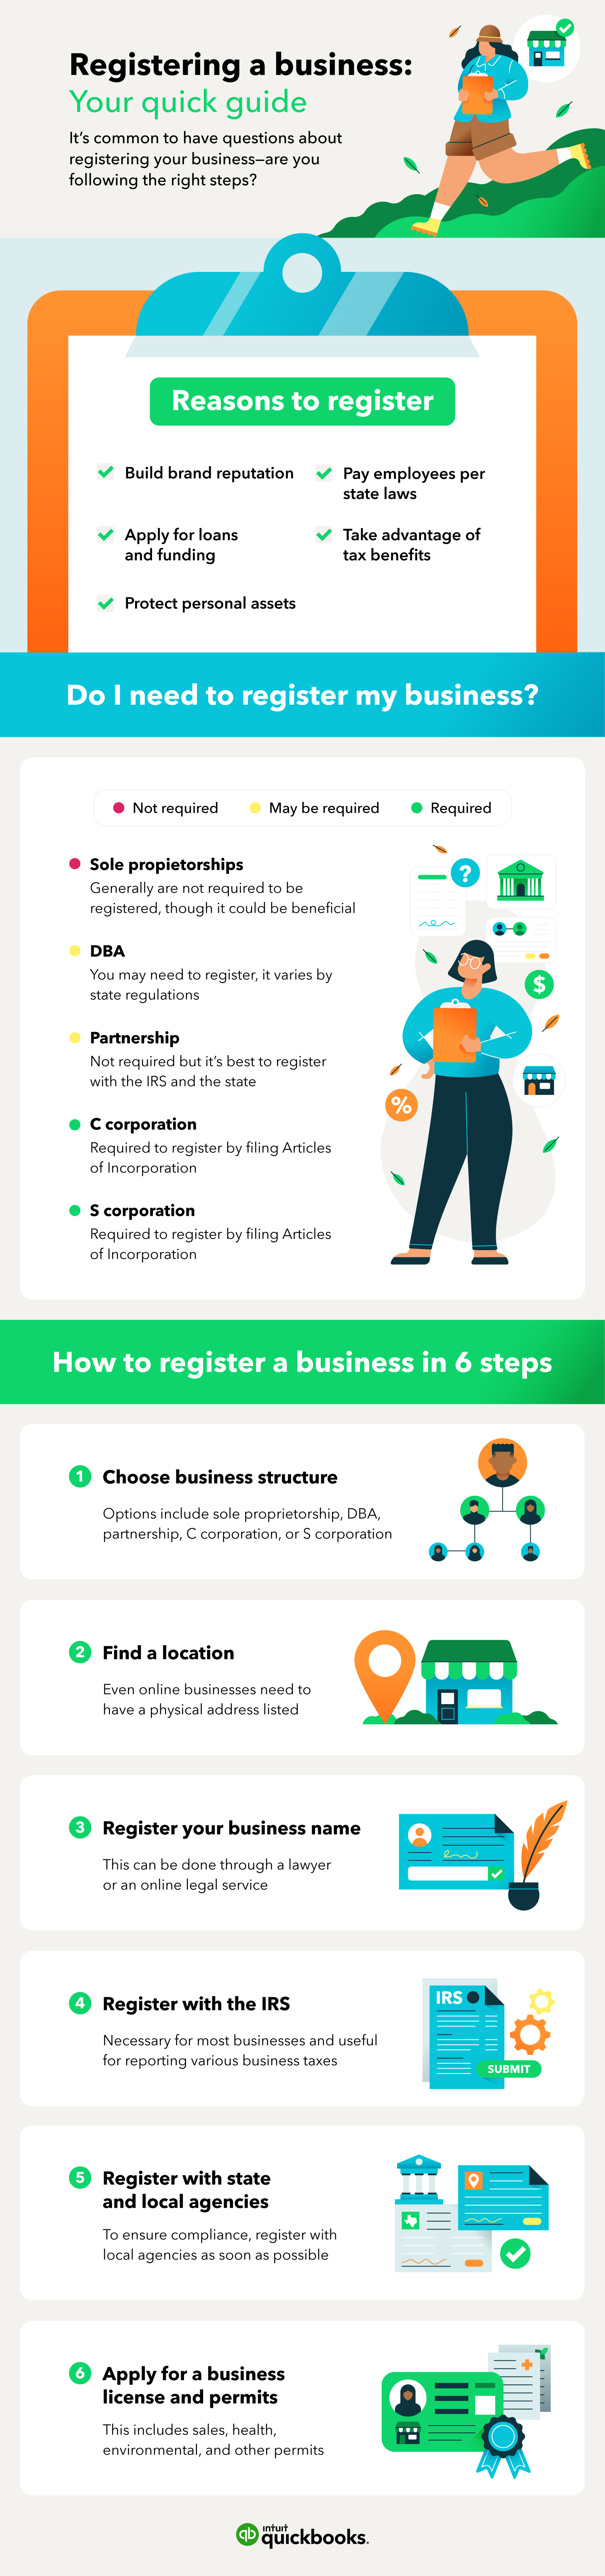 Quick guide on registering a business, including when it's necessary to register and the benefits of registering